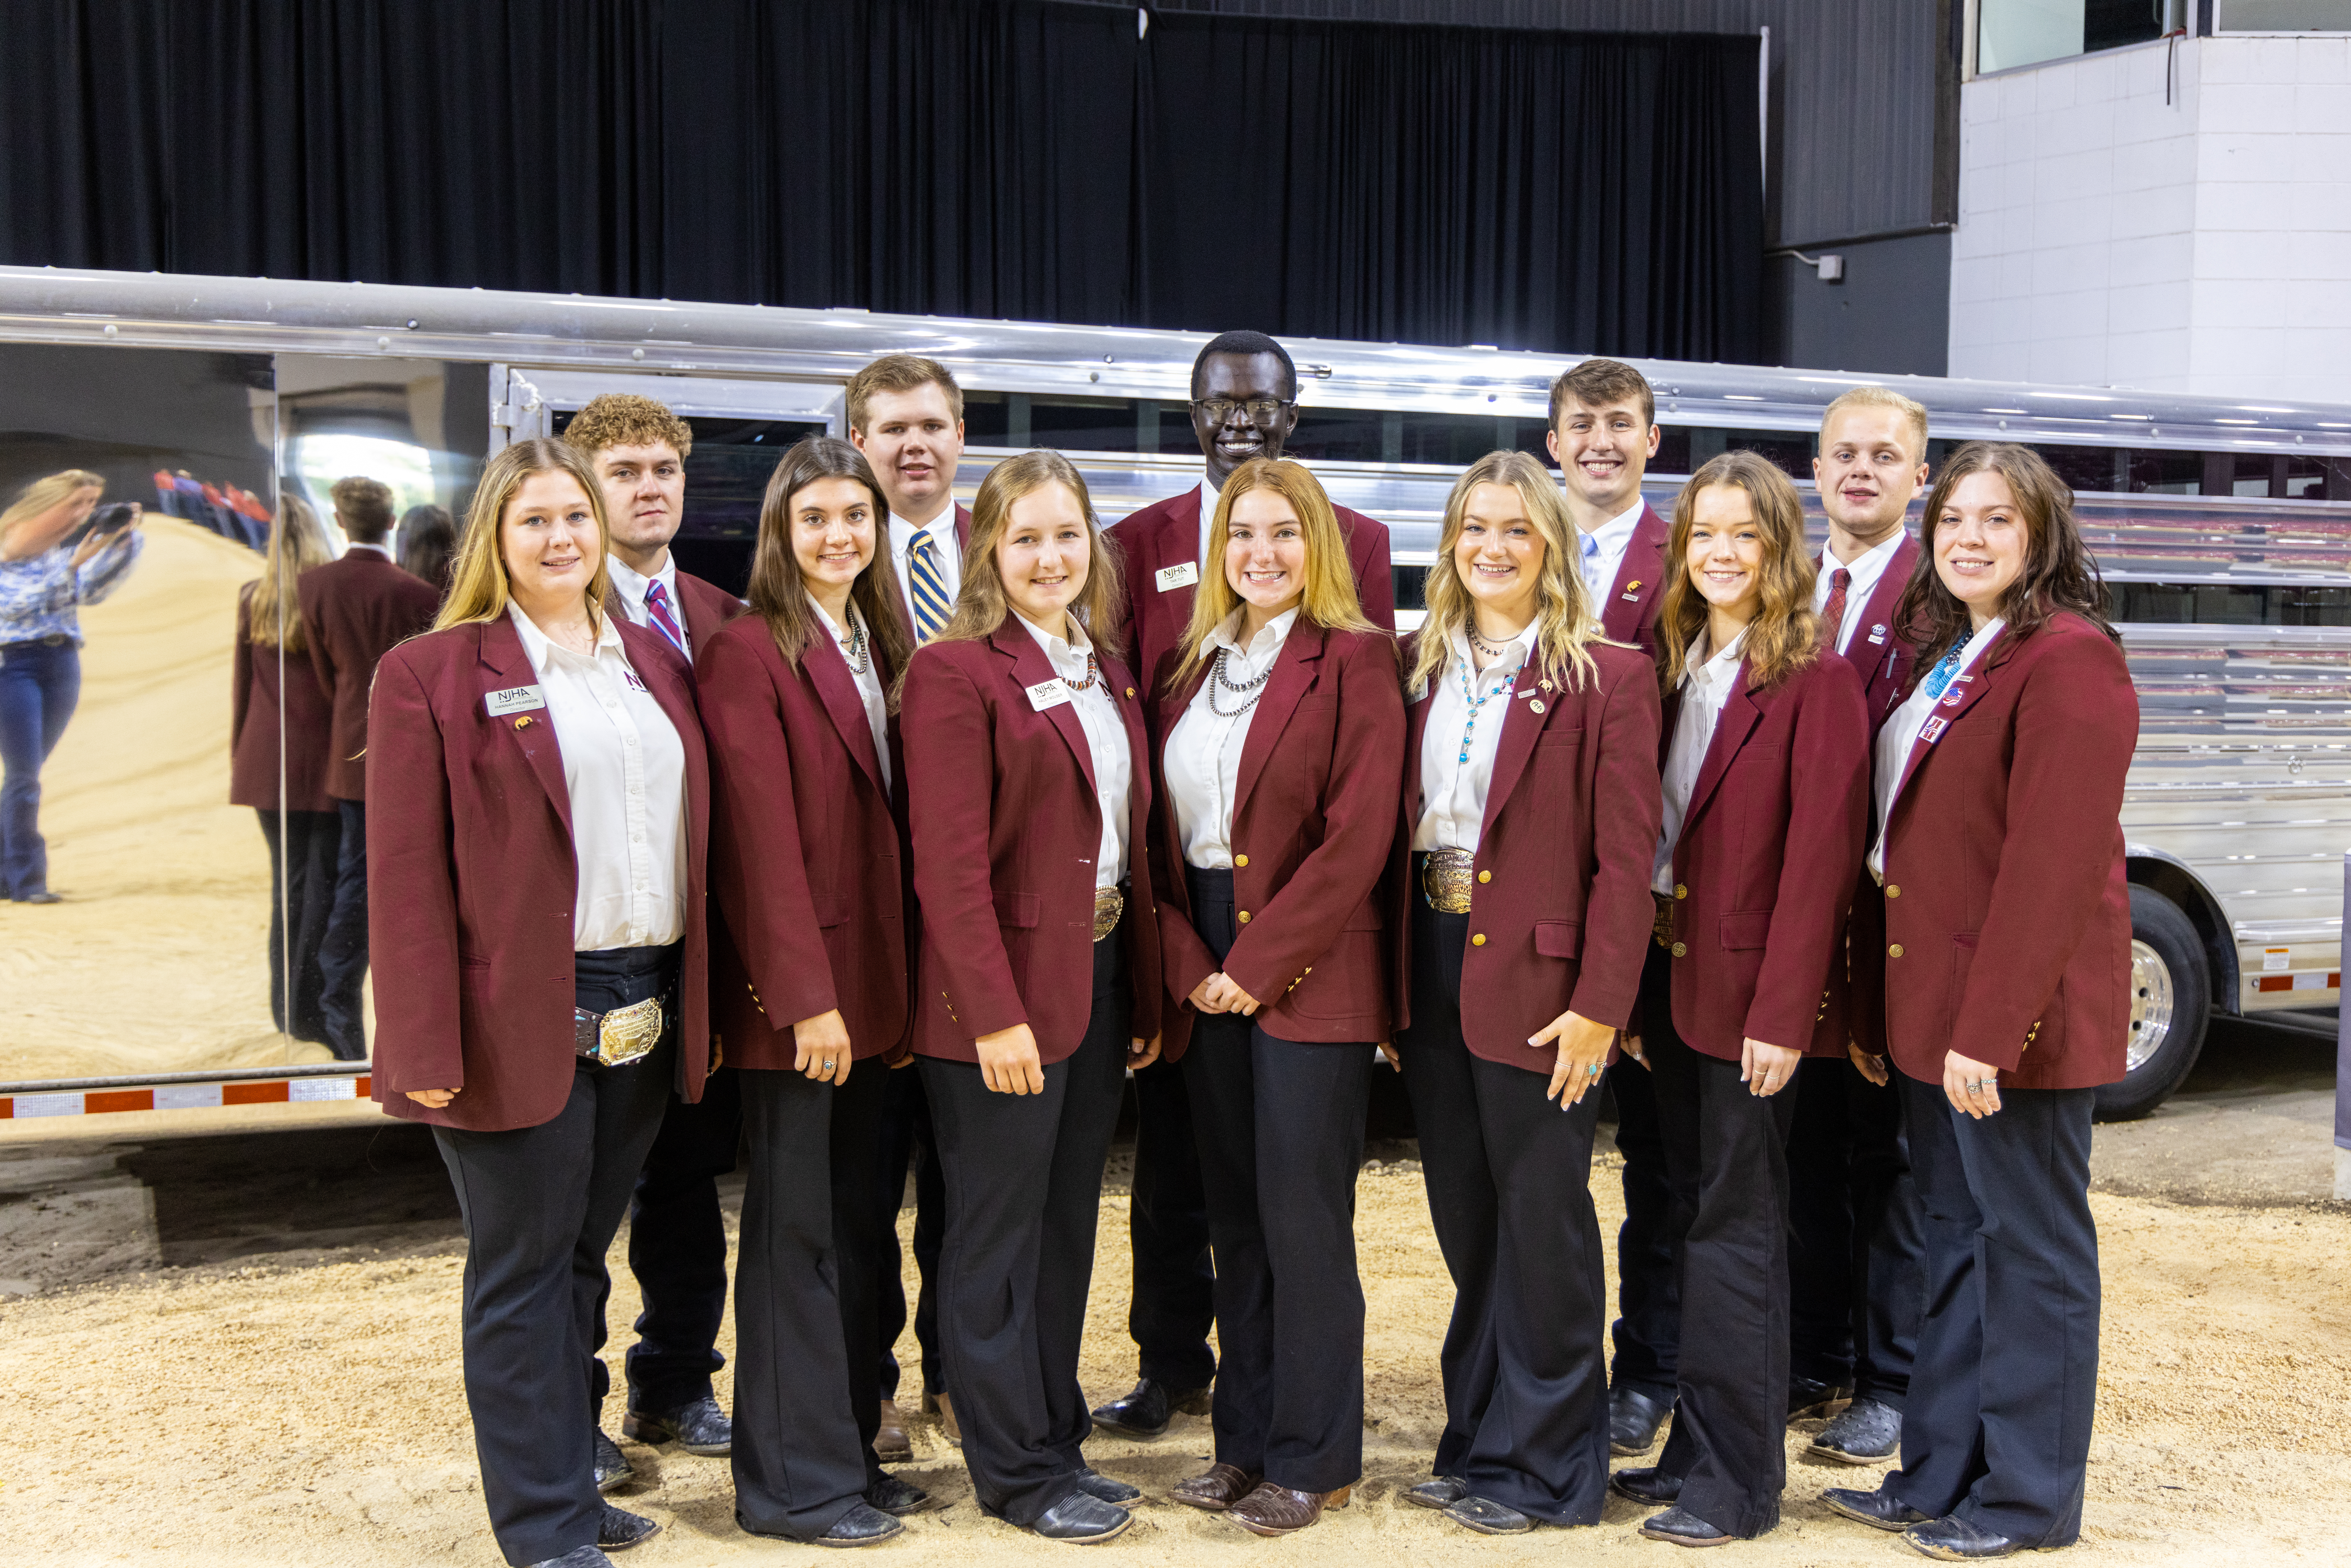 FOUR NEW LEADERS ELECTED TO SERVE THE NATIONAL JUNIOR HEREFORD ASSOCIATION